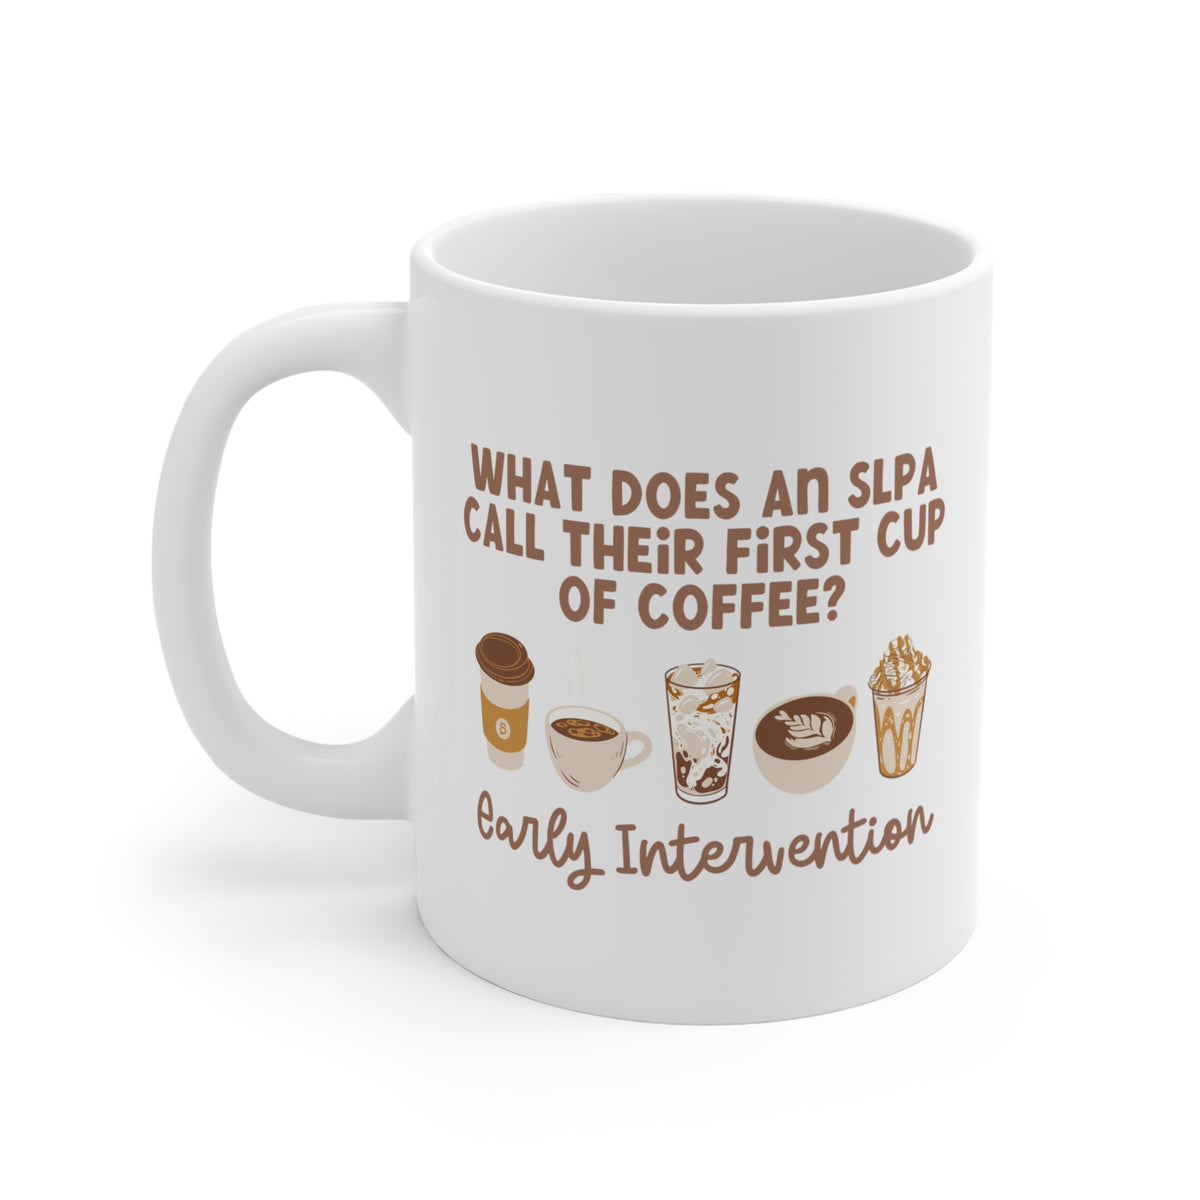 AskTamara: Which mugs are Lead-free? How can I tell if my mug has